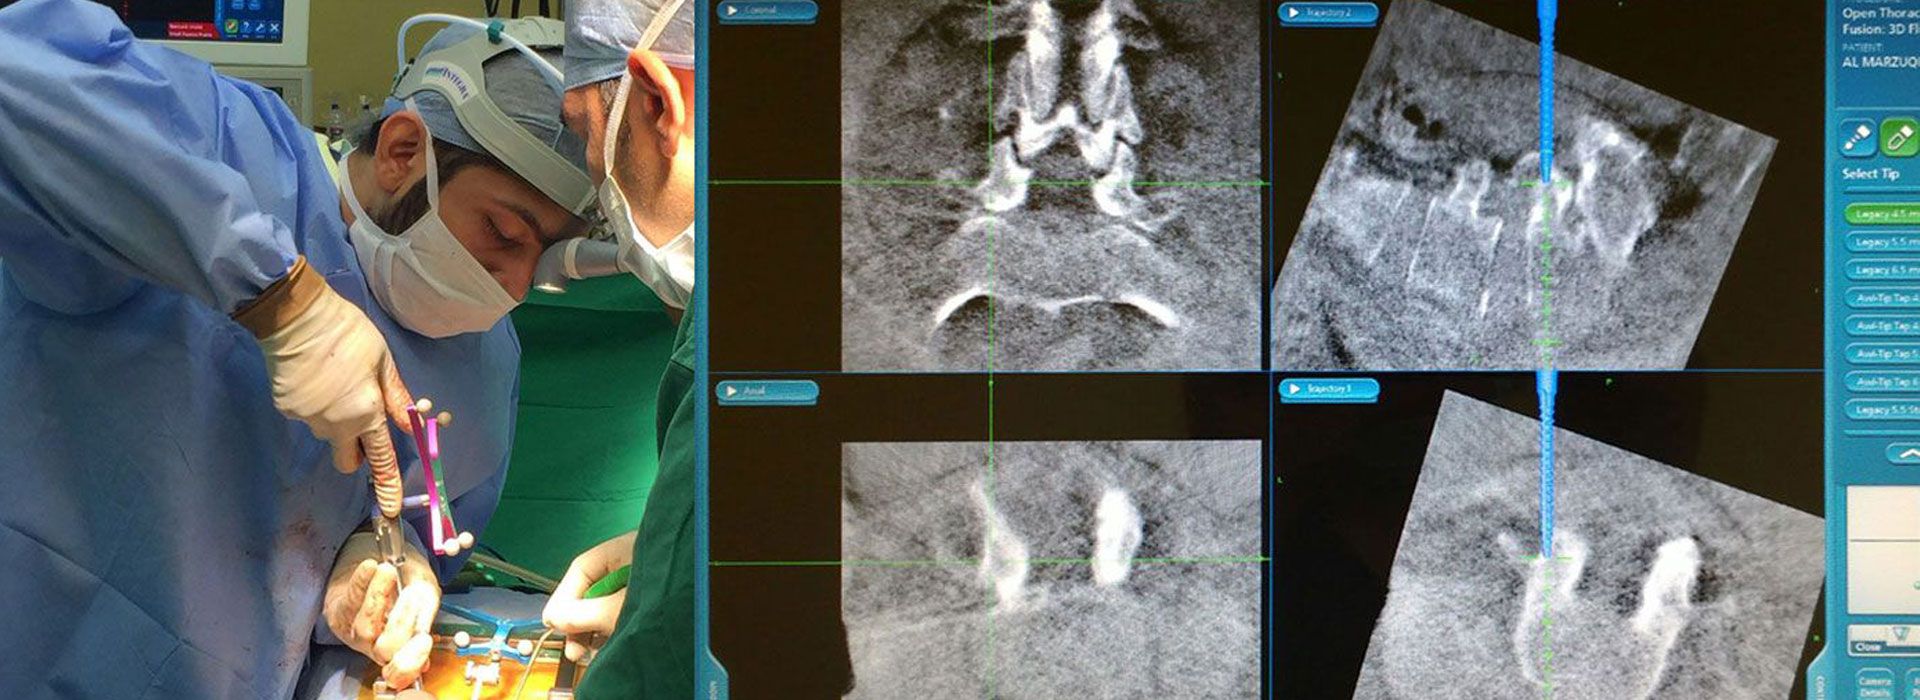 computer assisted spine surgery